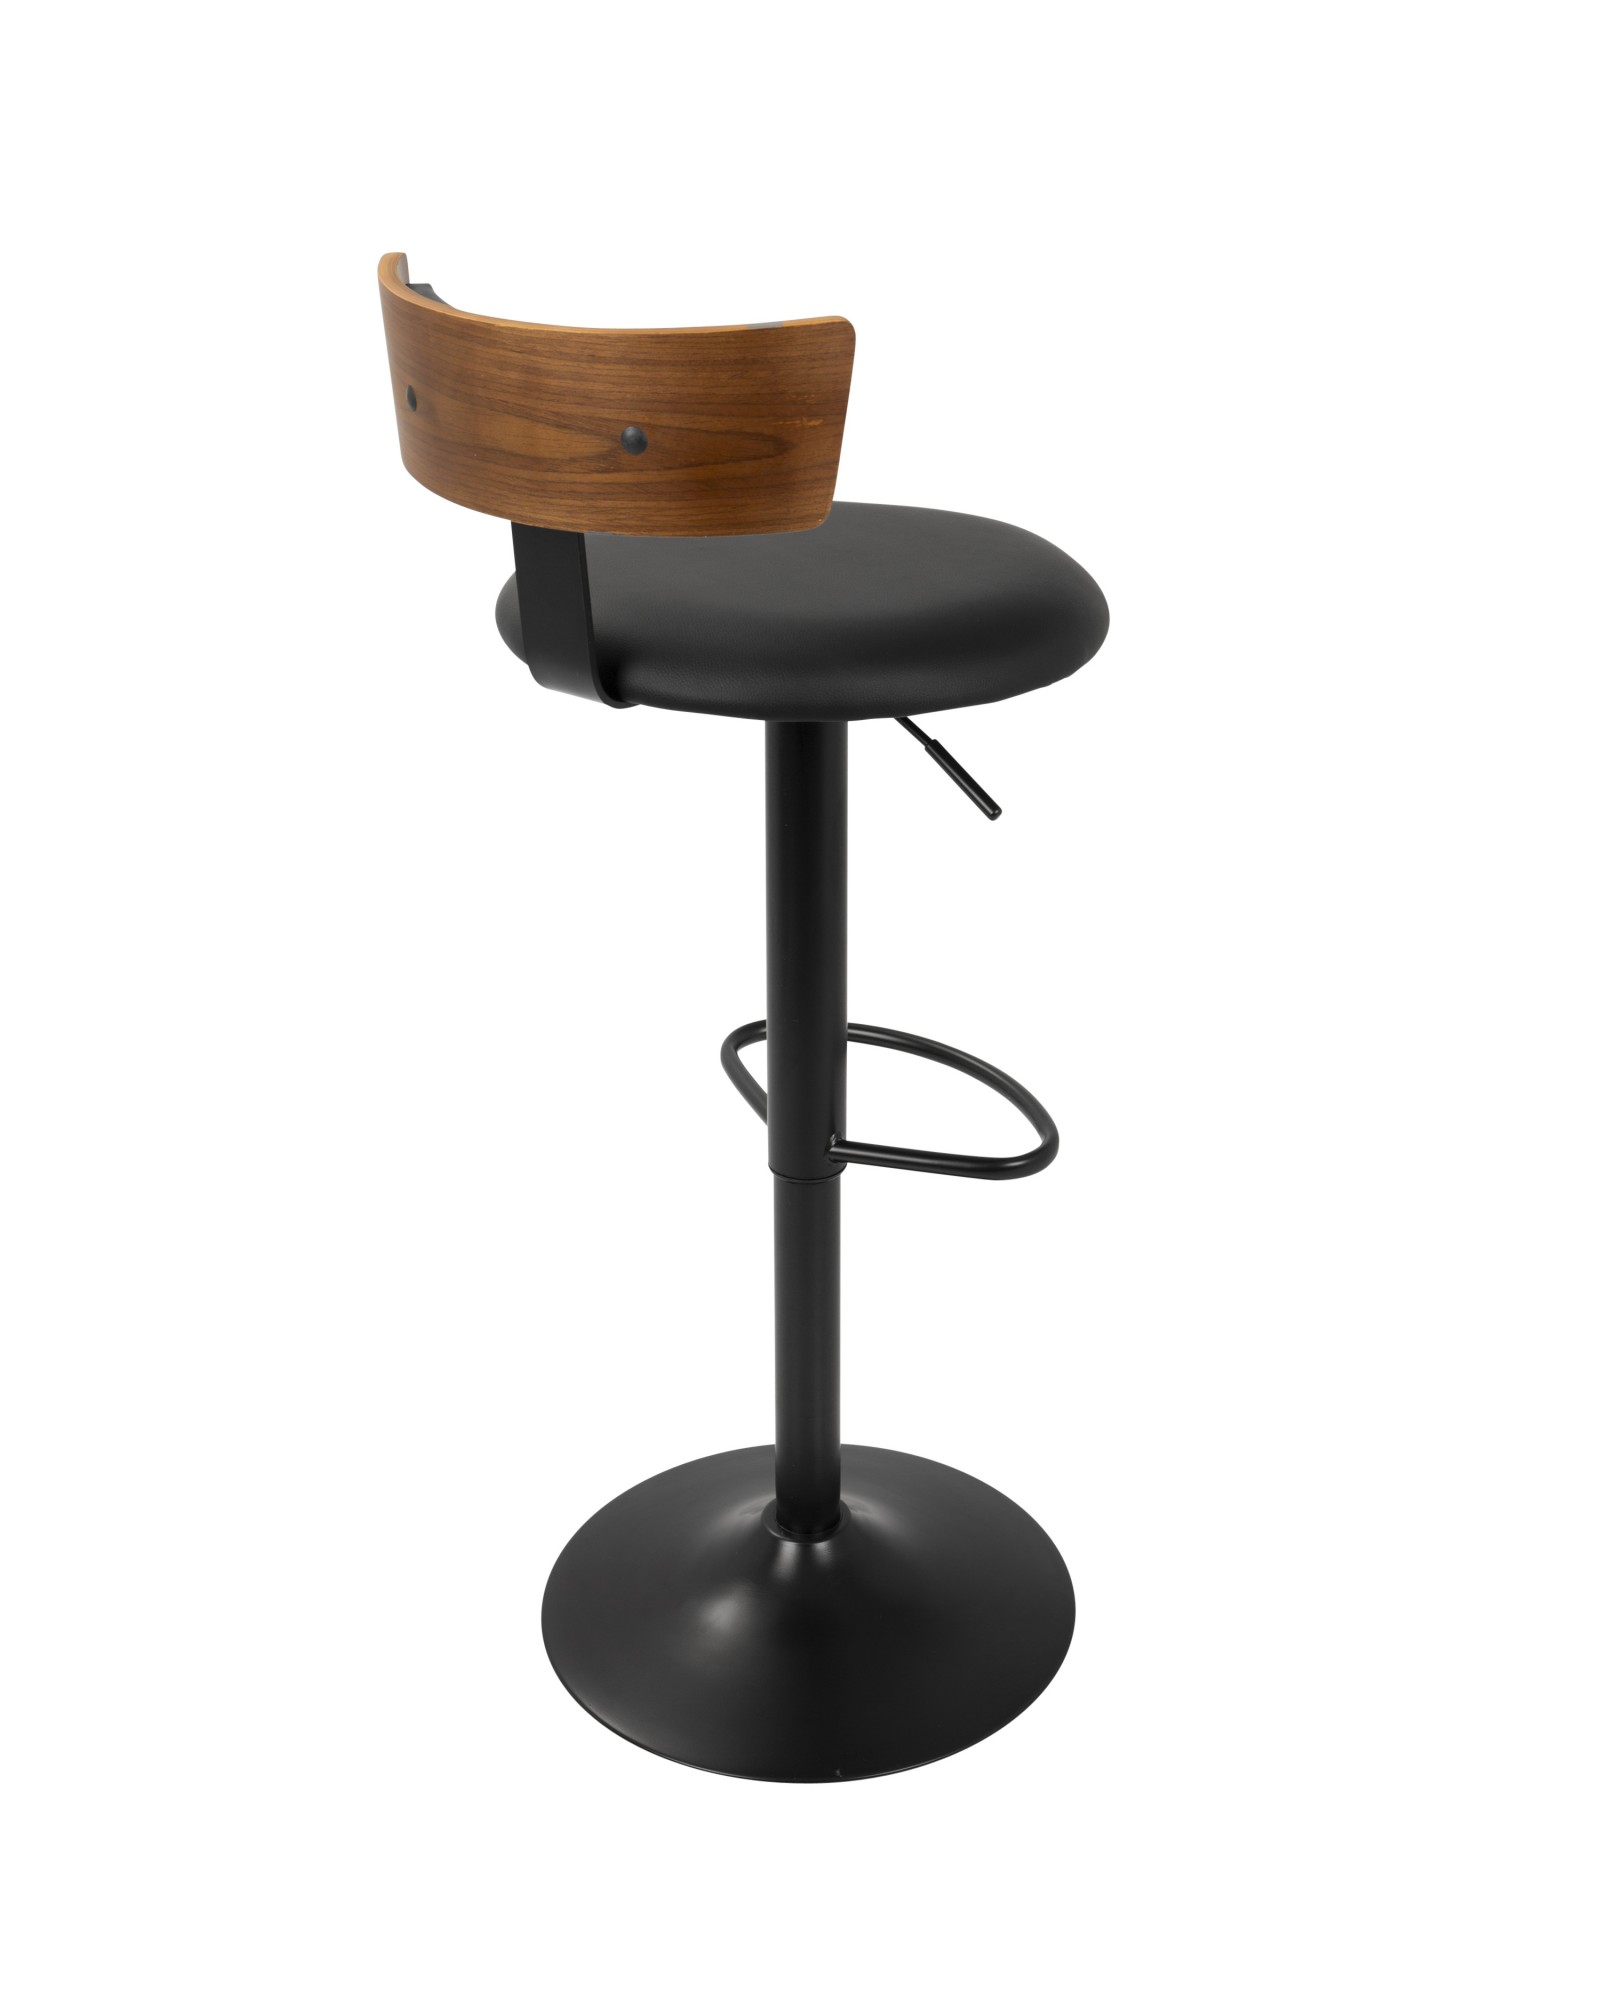 Weller Contemporary Barstool with Black Frame, Walnut Wood, and Black Faux Leather